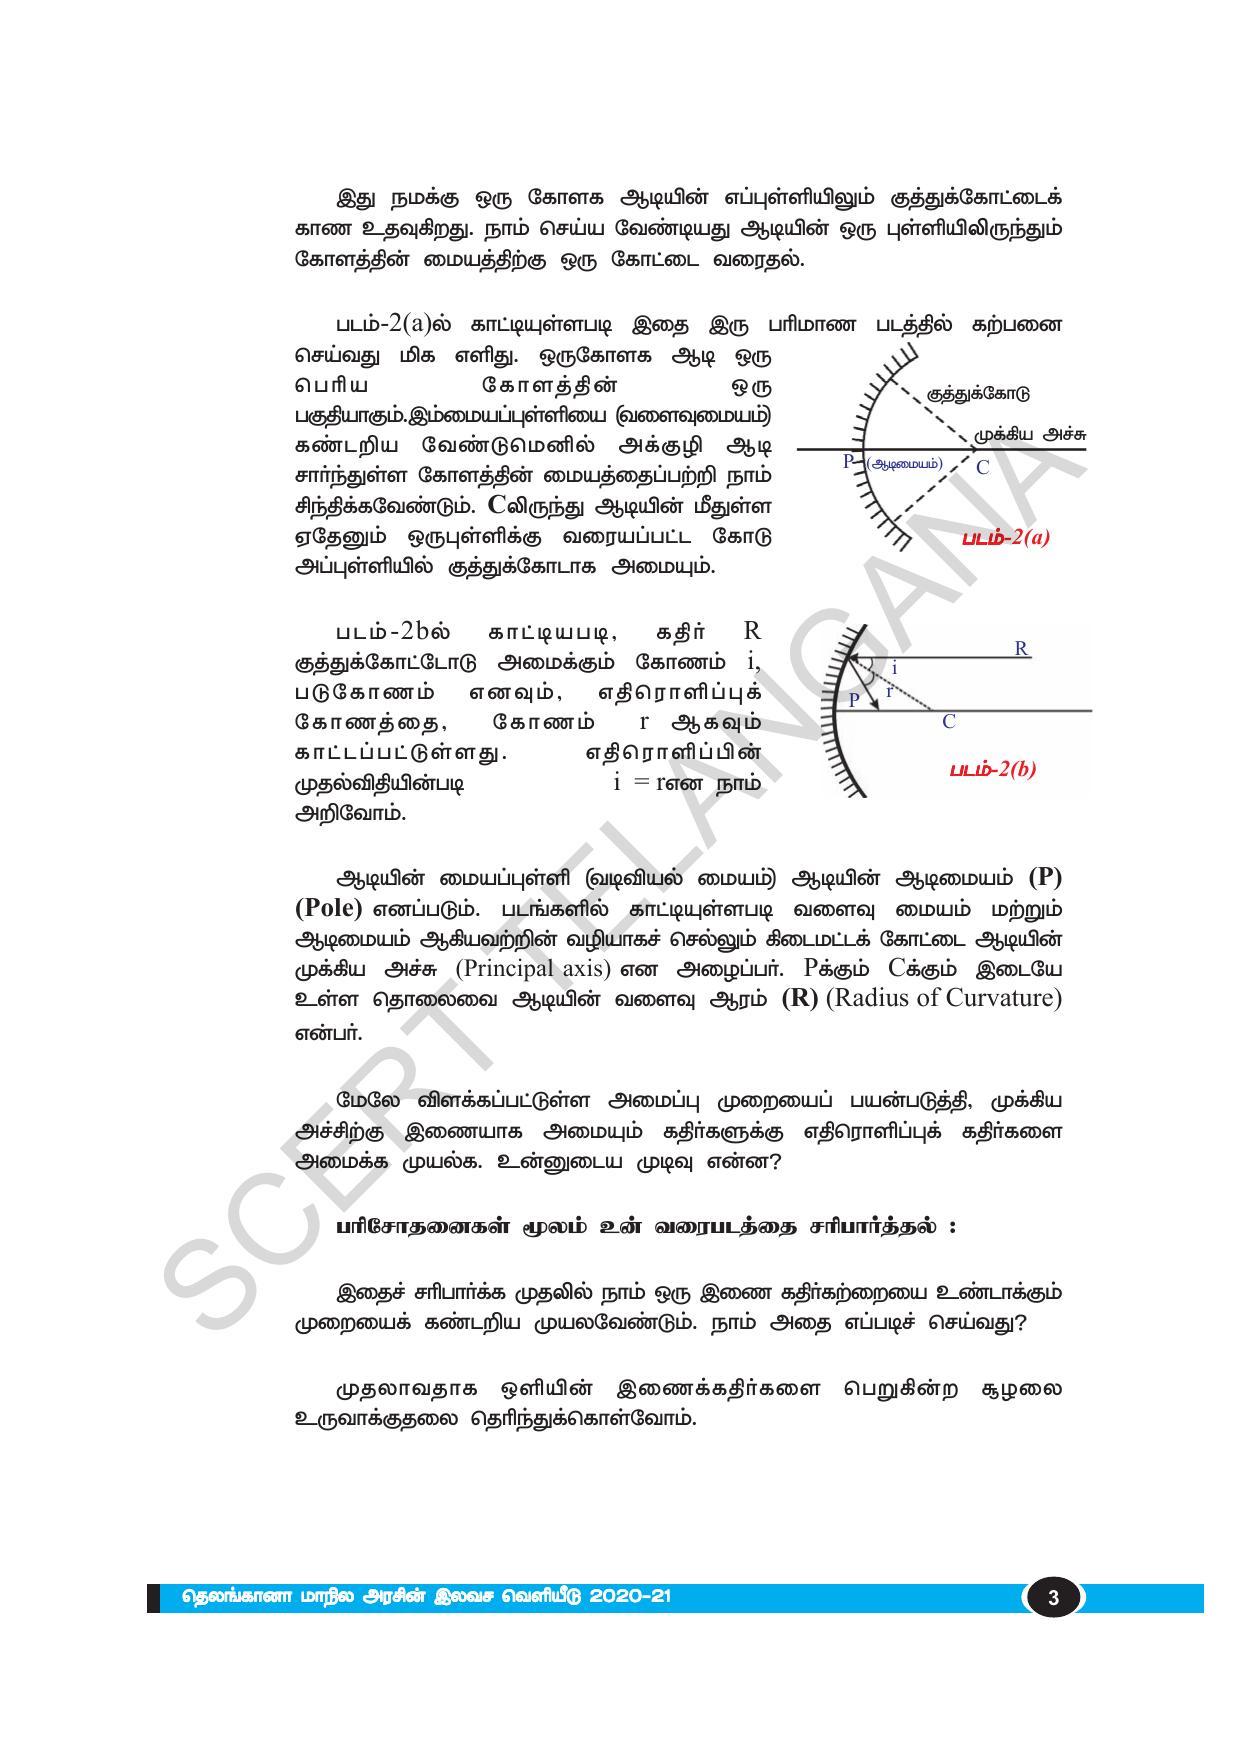 TS SCERT Class 10 Physical Science(Tamil Medium) Text Book - Page 15